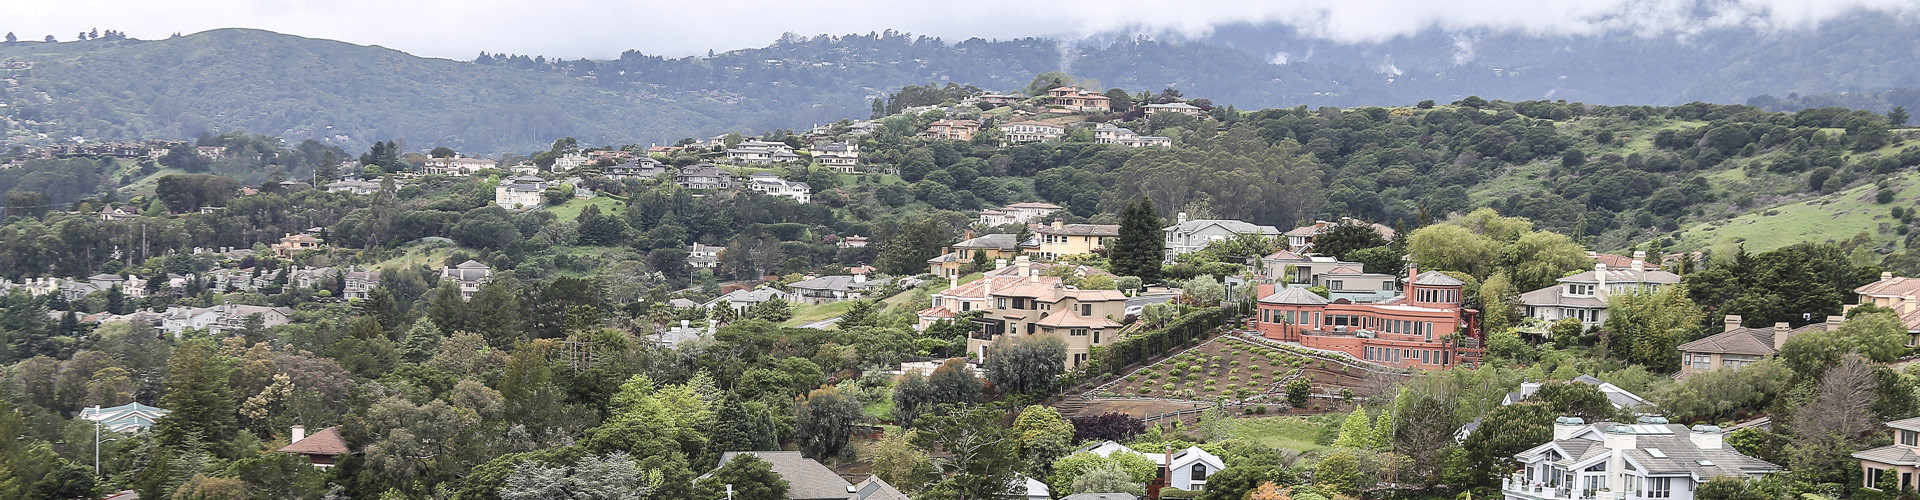 Tiburon open space and homes